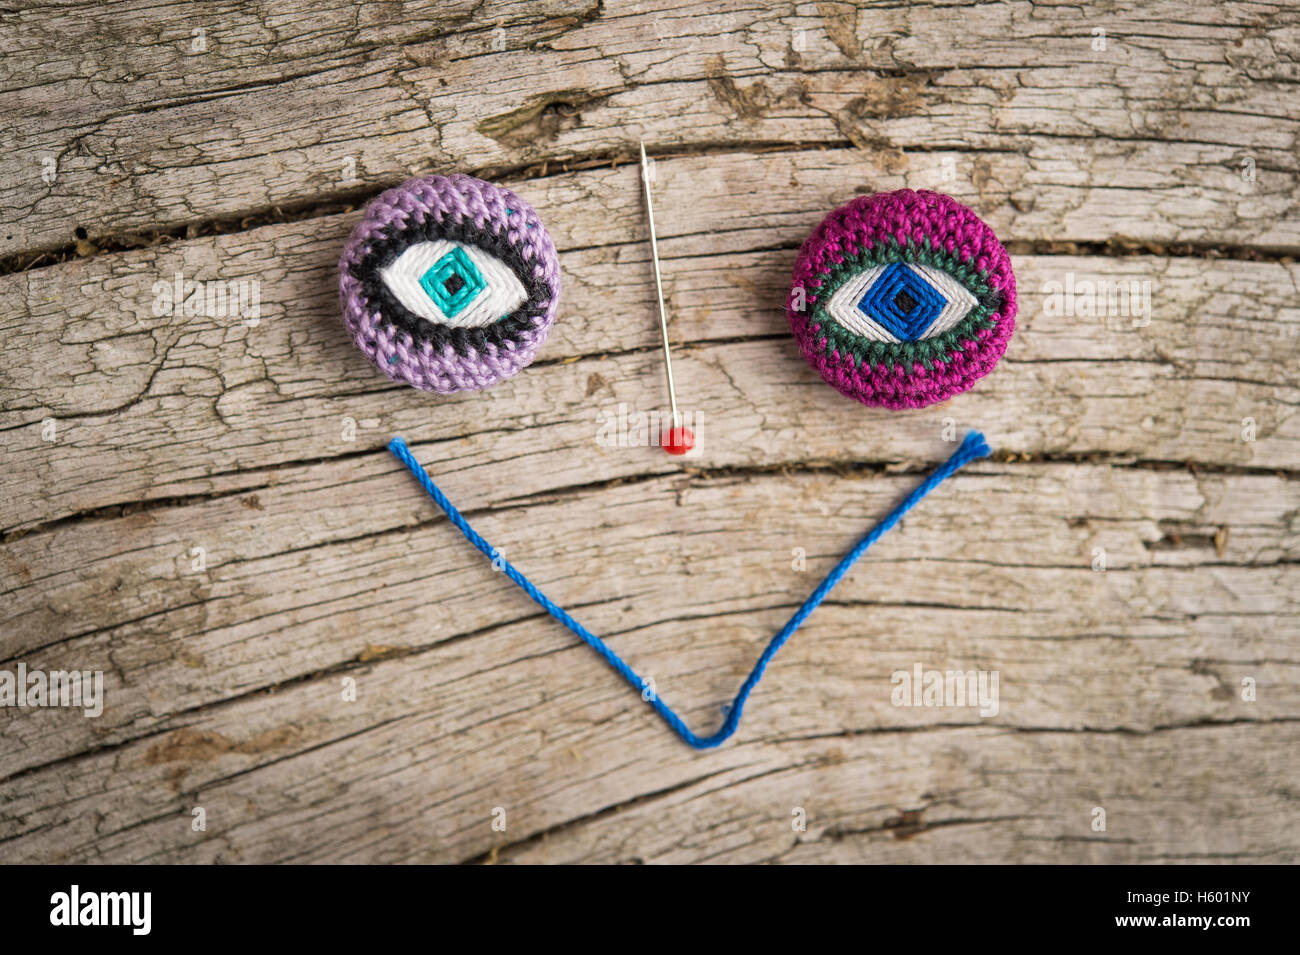 Face, two Posamentenknöpfe as eyes, pin as a nose and yarn as a mouth on wooden panel Stock Photo